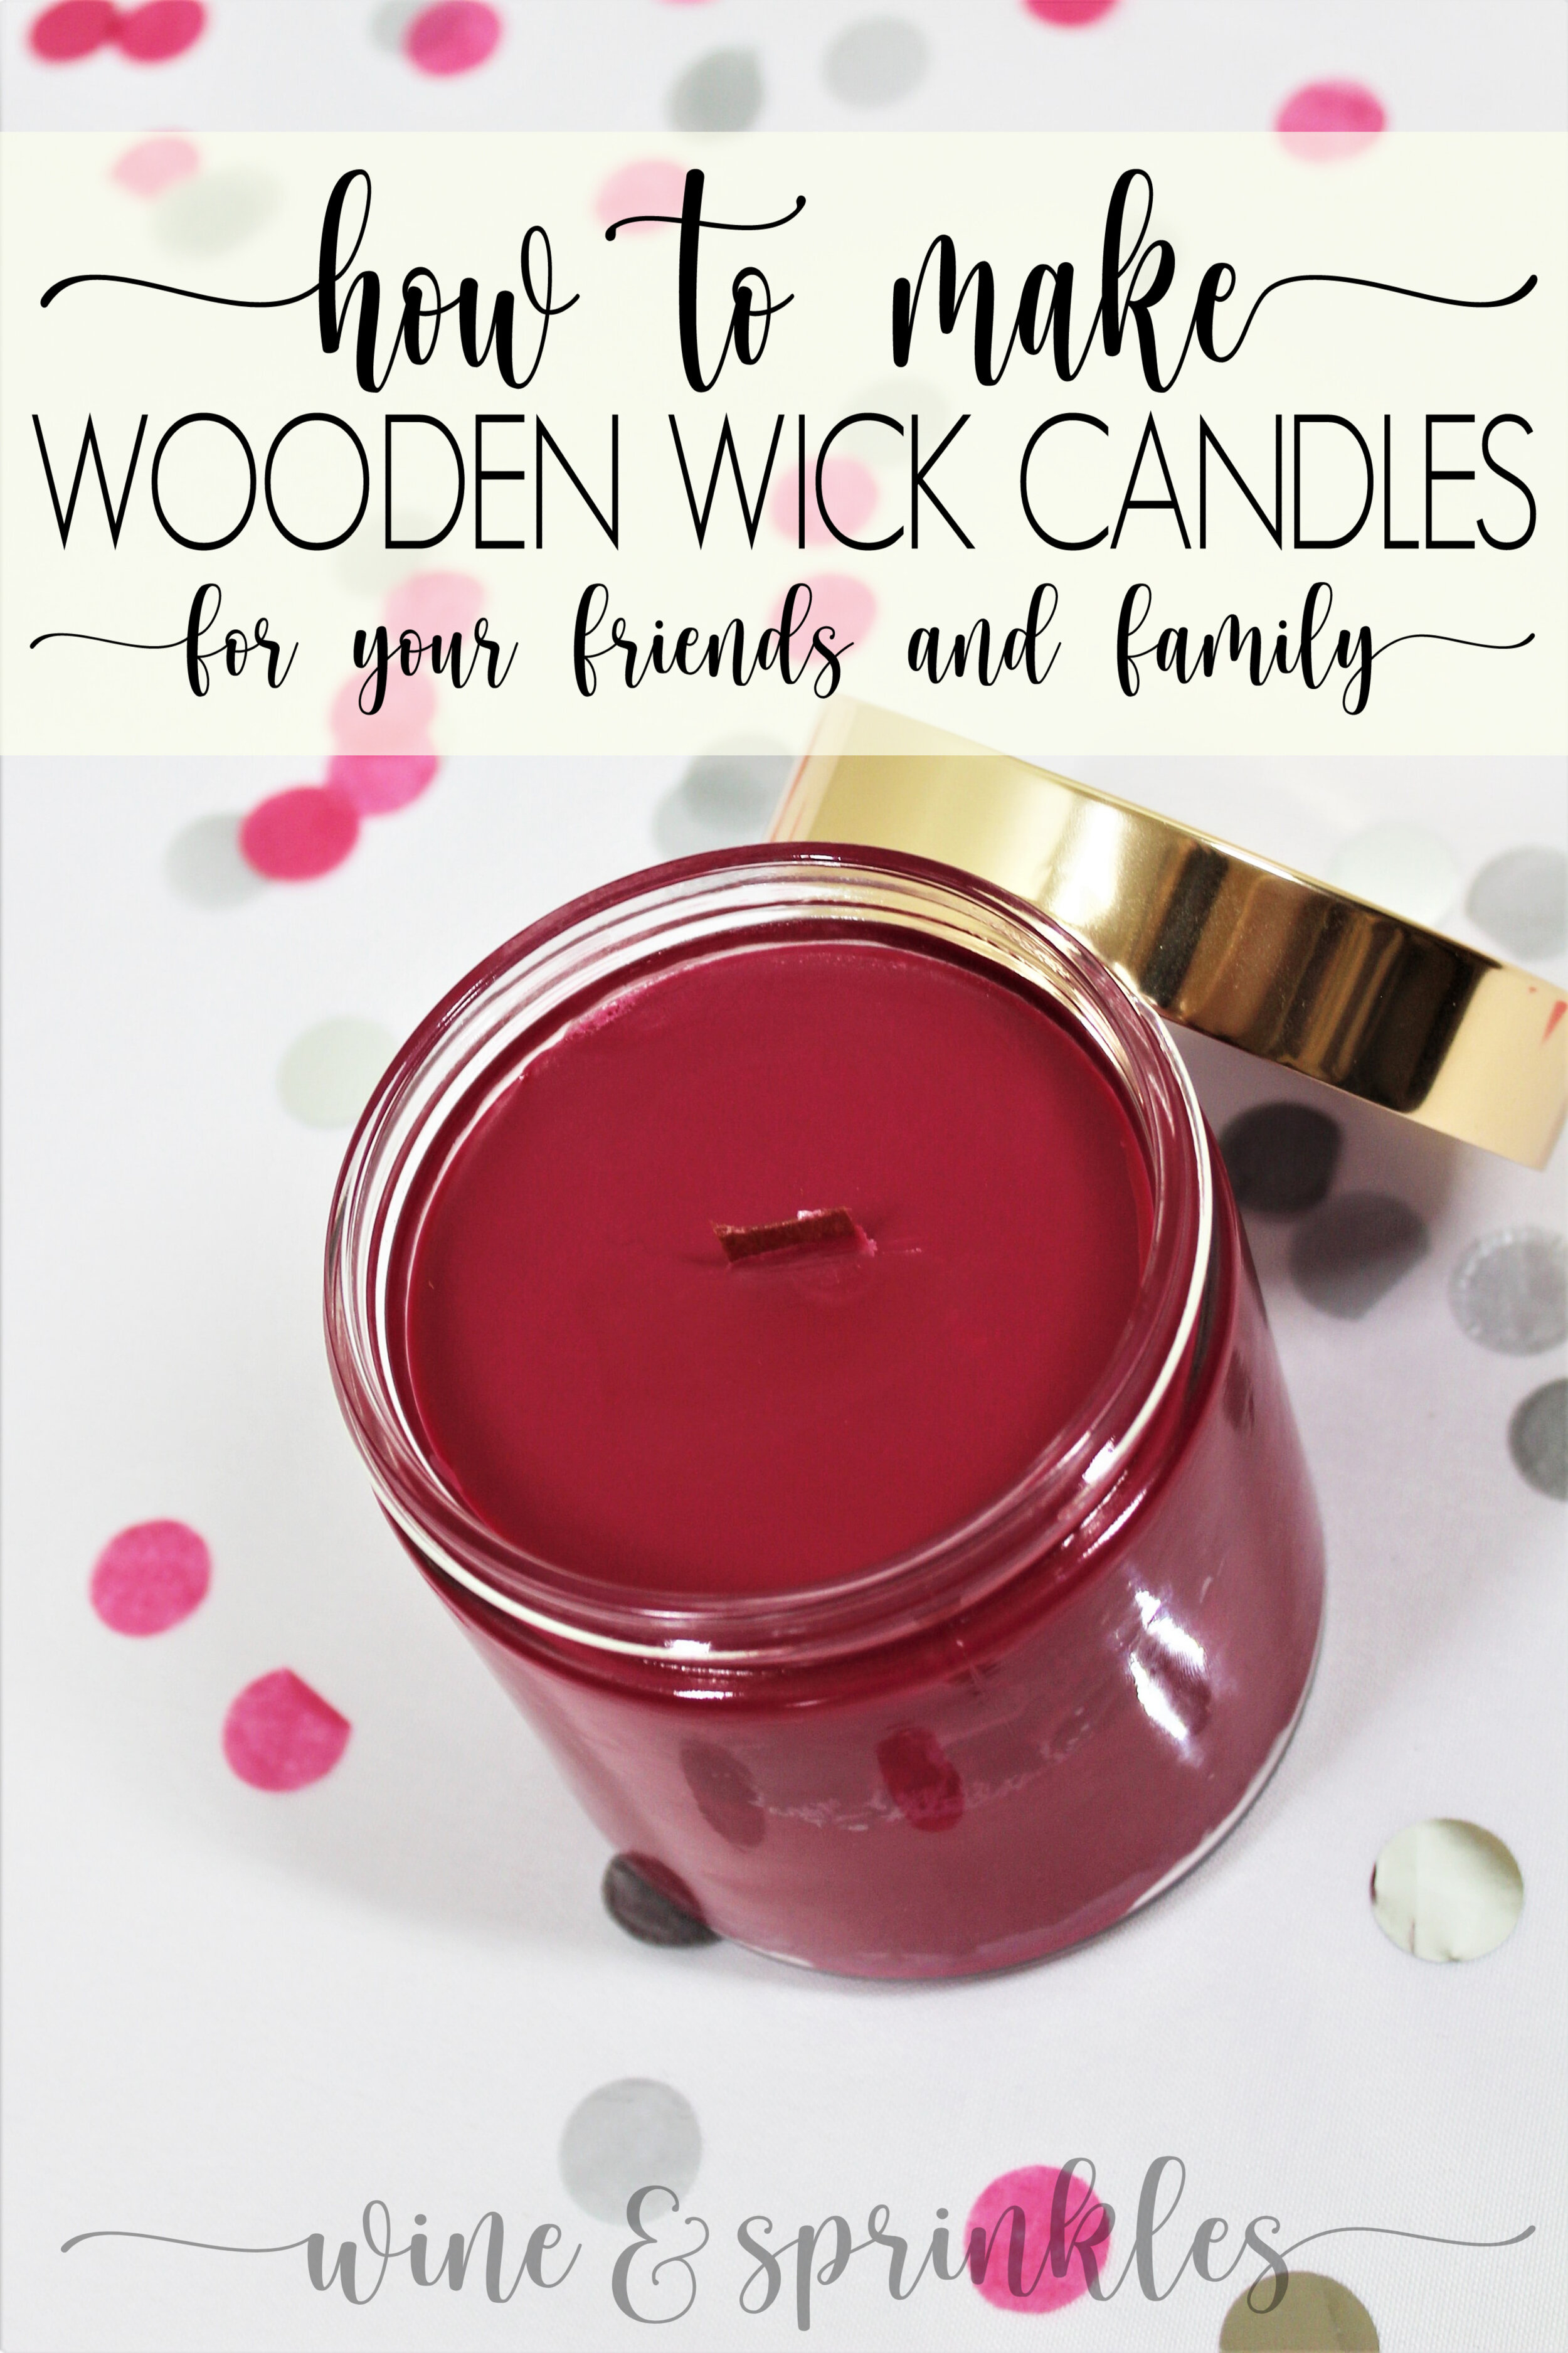 DIY Scented Soy Wax Wooden Wick Candles